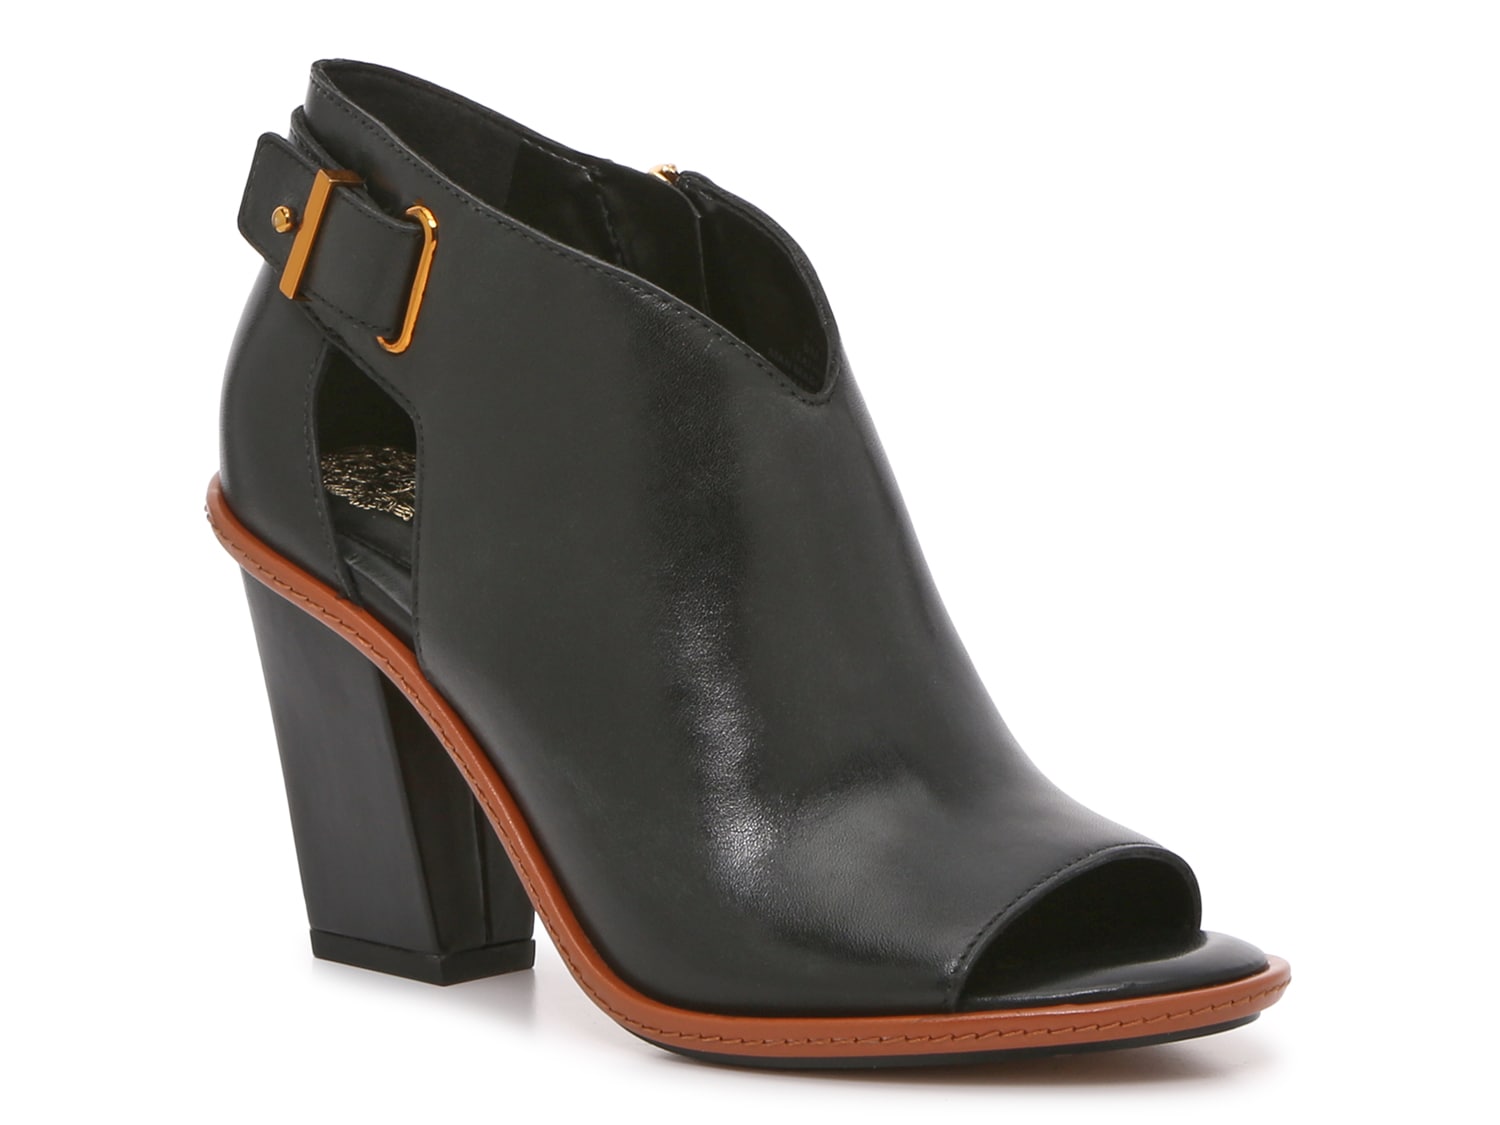 Vince Camuto Faydra Bootie - Free Shipping | DSW